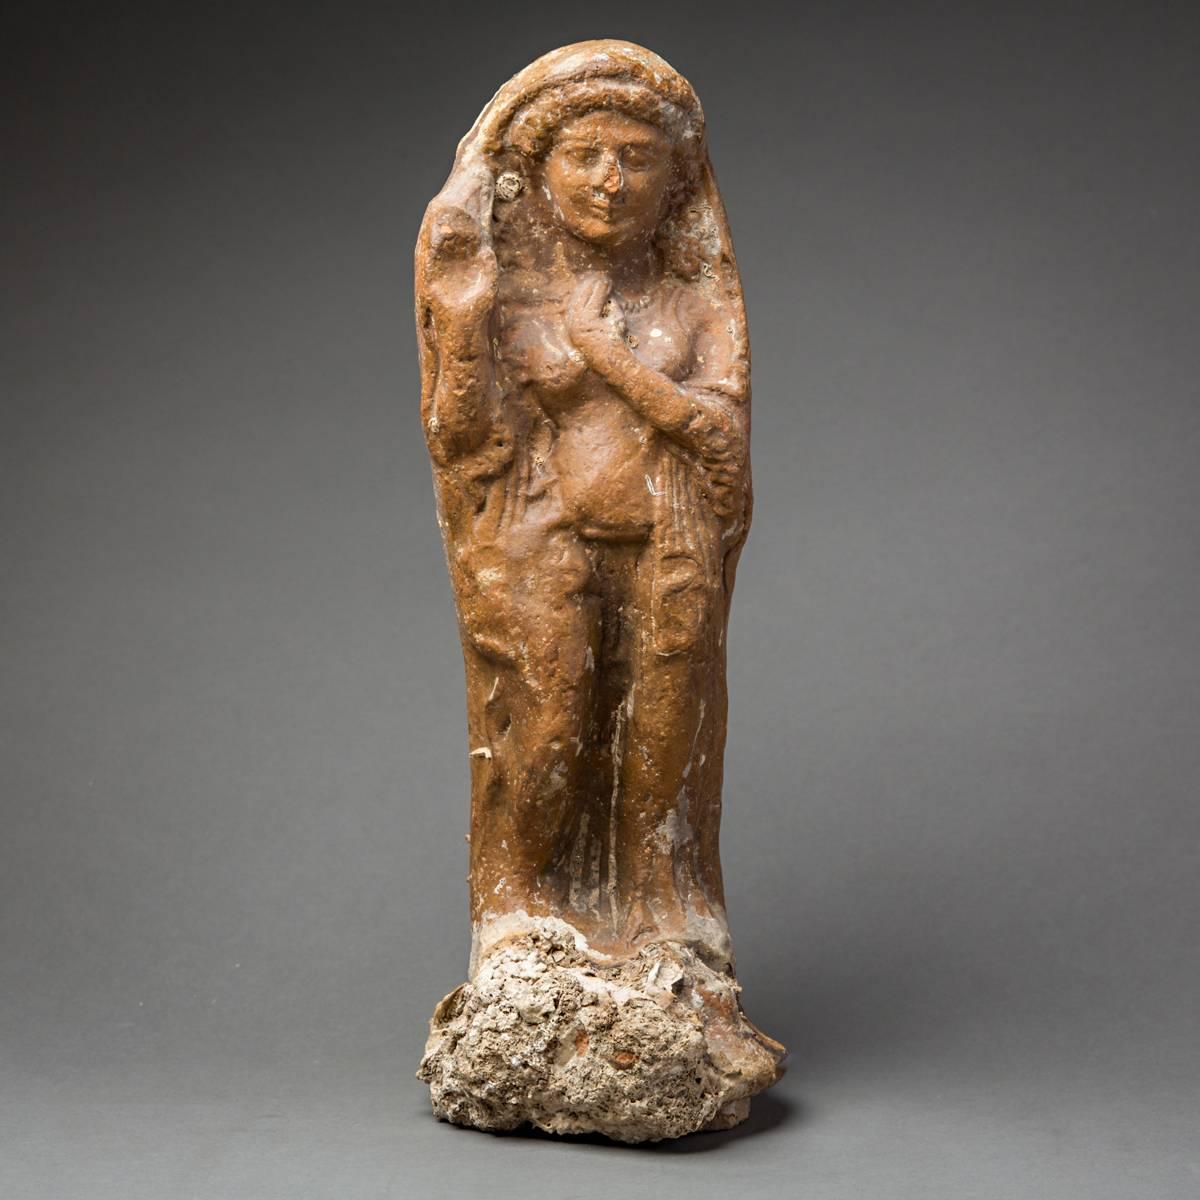 This outstandingly beautiful and well-preserved ceramic sculpture is a votive figure from the middle of the first millennium BC, and represents a Phoenician deity. It depicts a goddess standing on an integral base, which bears an offerings bowl